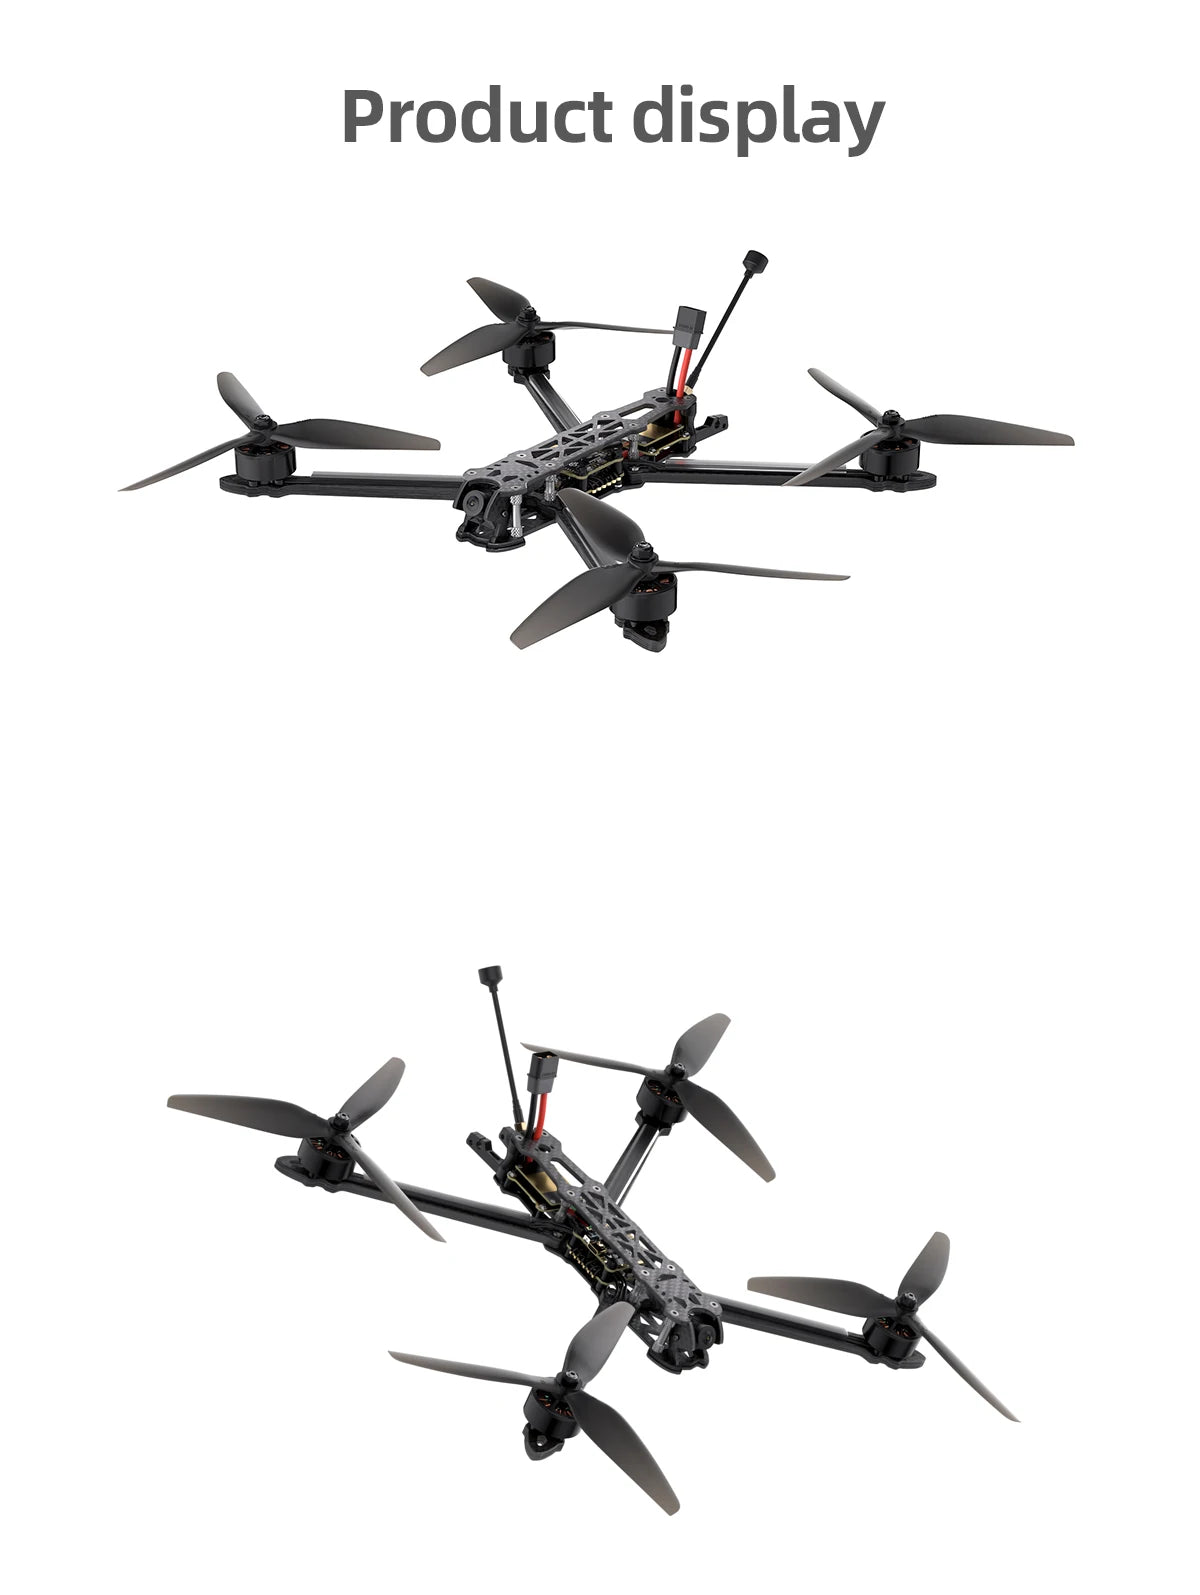 GEPRC MARK4 LR8 4.9G 2.5W FPV, in mining areas or closeto radio transmission towers,high-voltage wires,sub